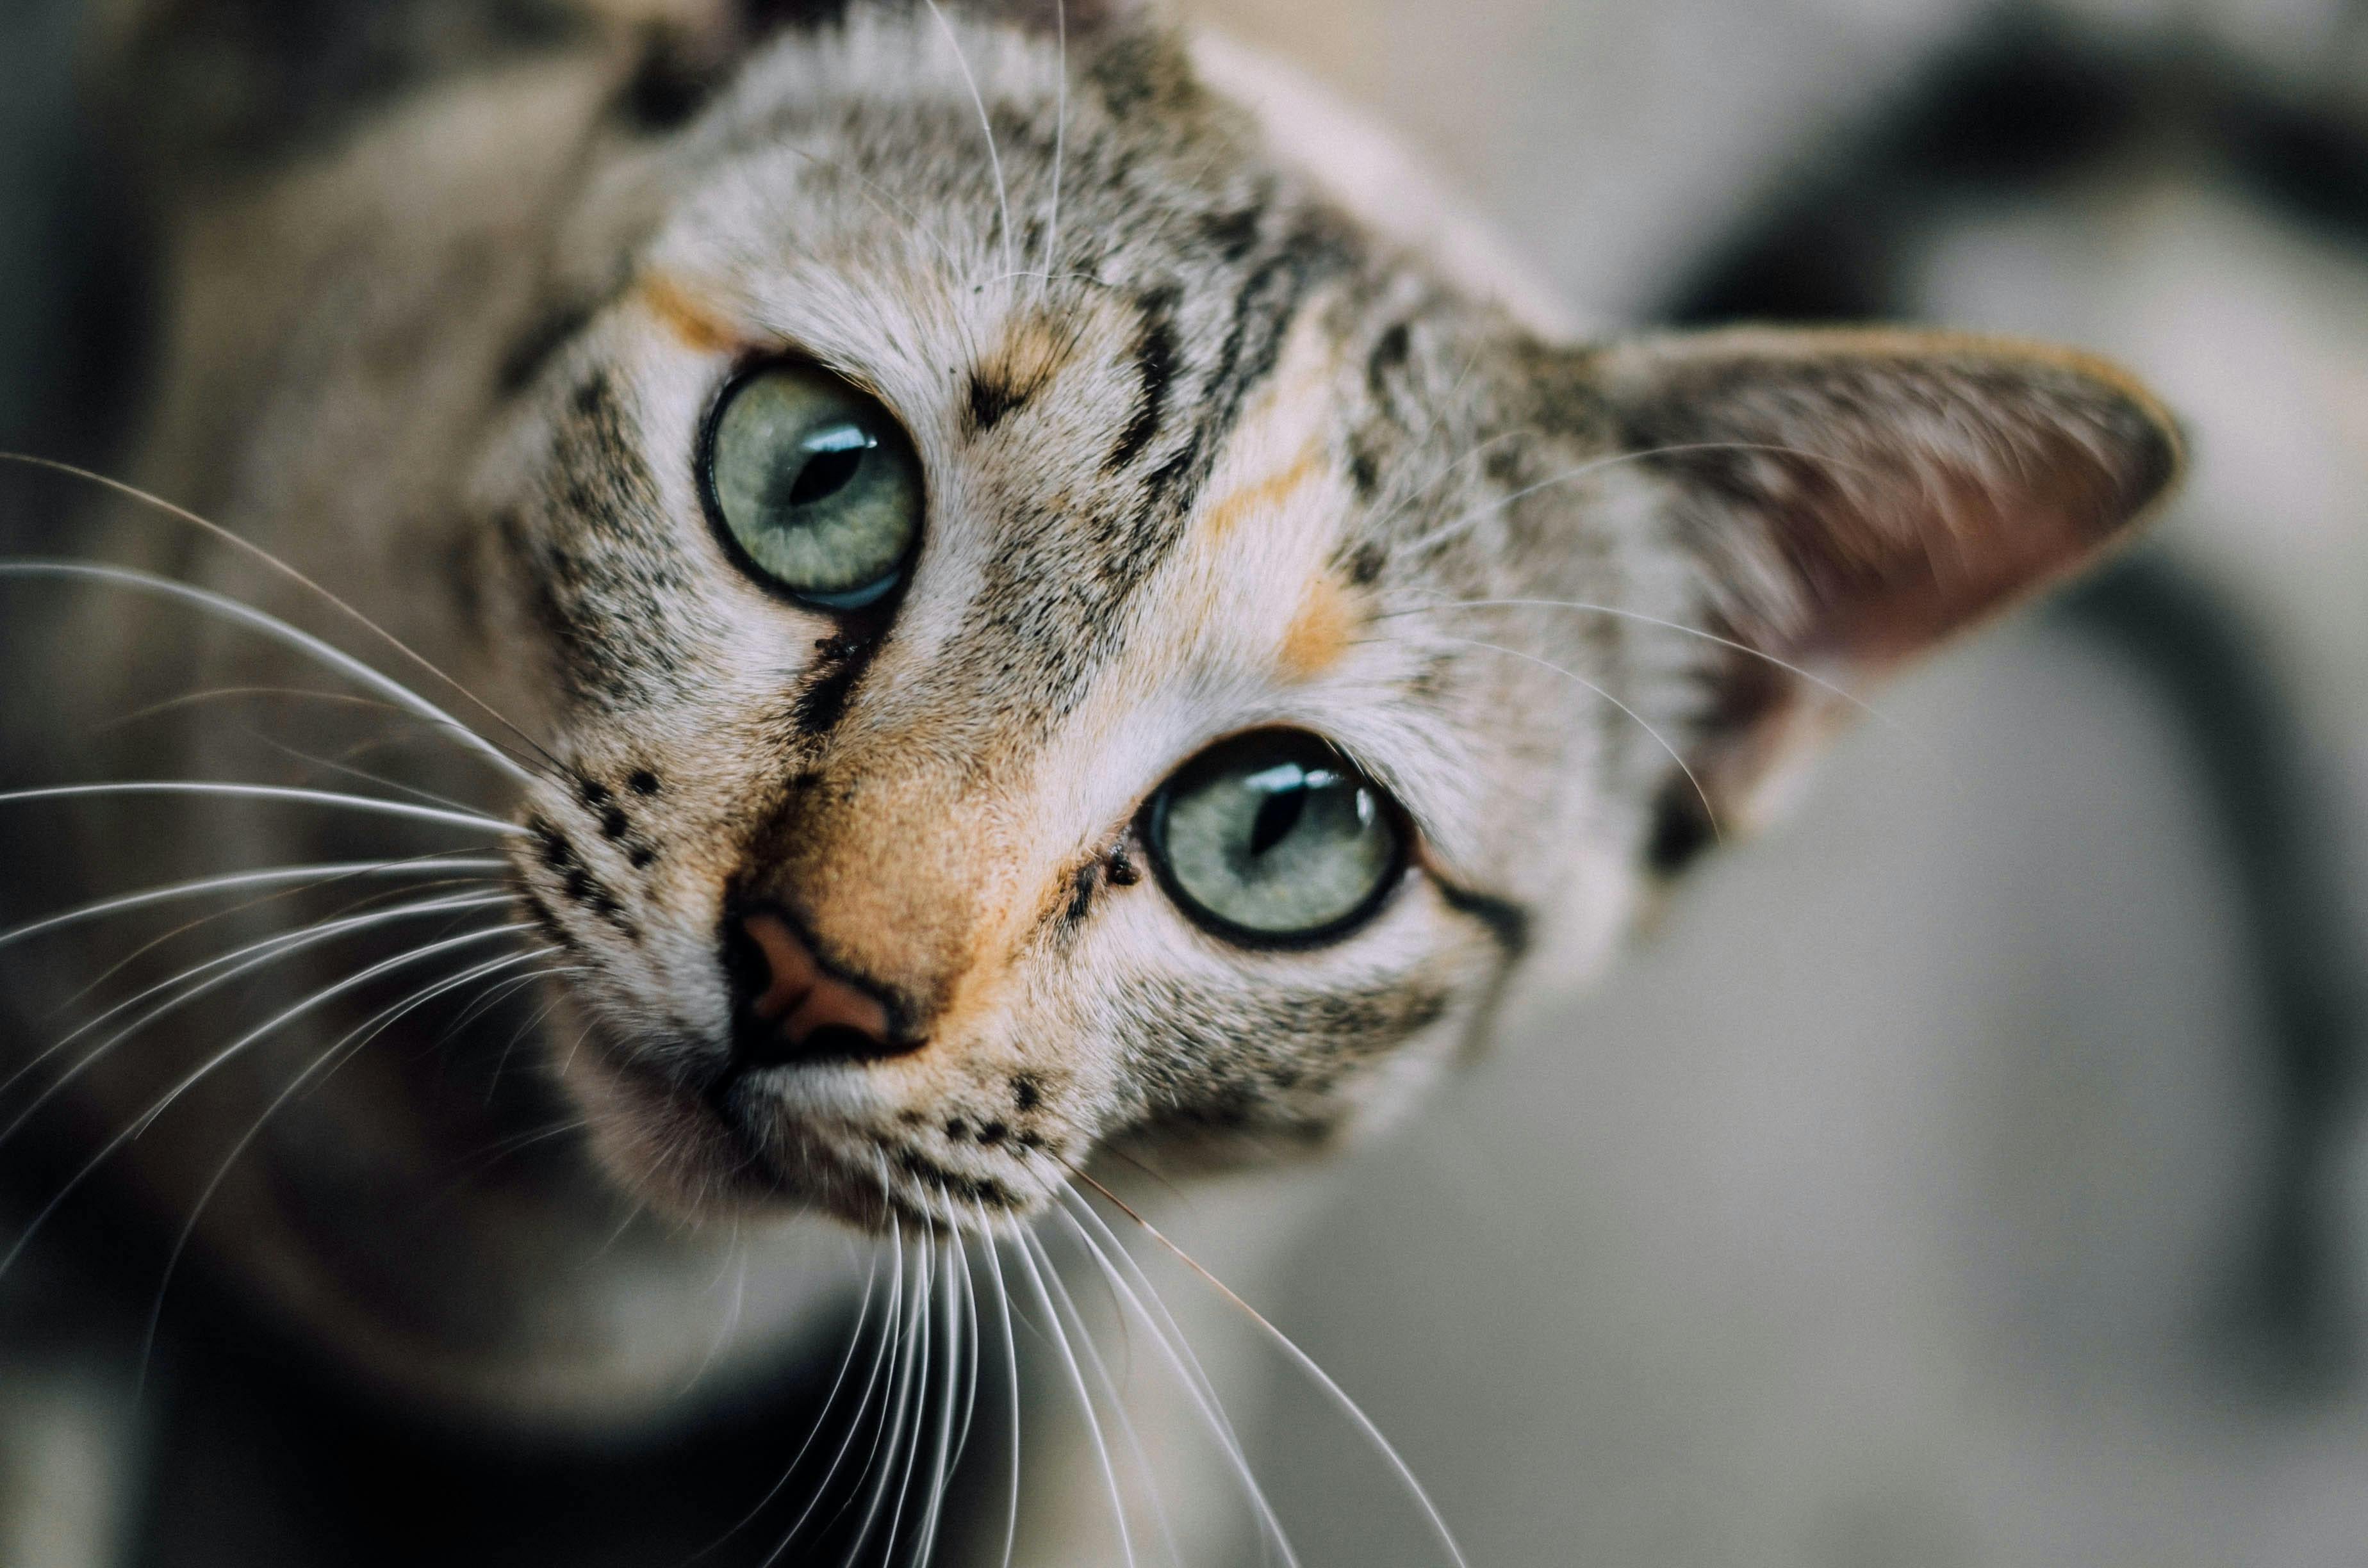 Close up of a tabby cat with green eyes.